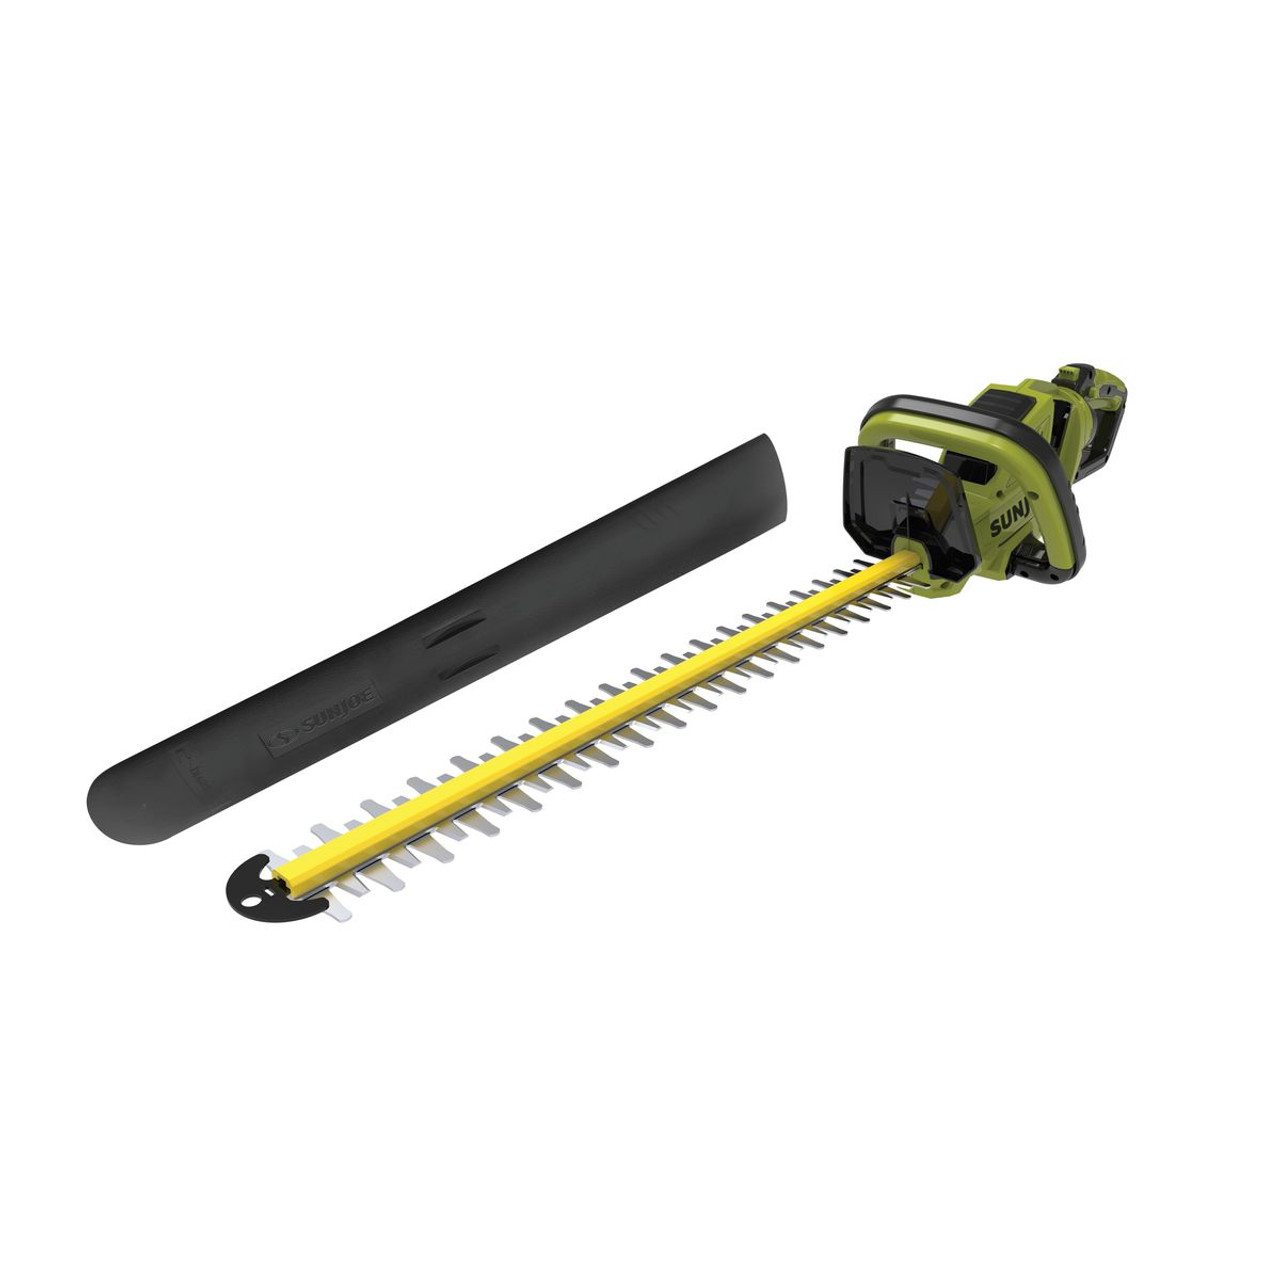 Sun Joe Hedge Trimmer Cordless, 48-Volt iON, 24-inch Tool Only product image